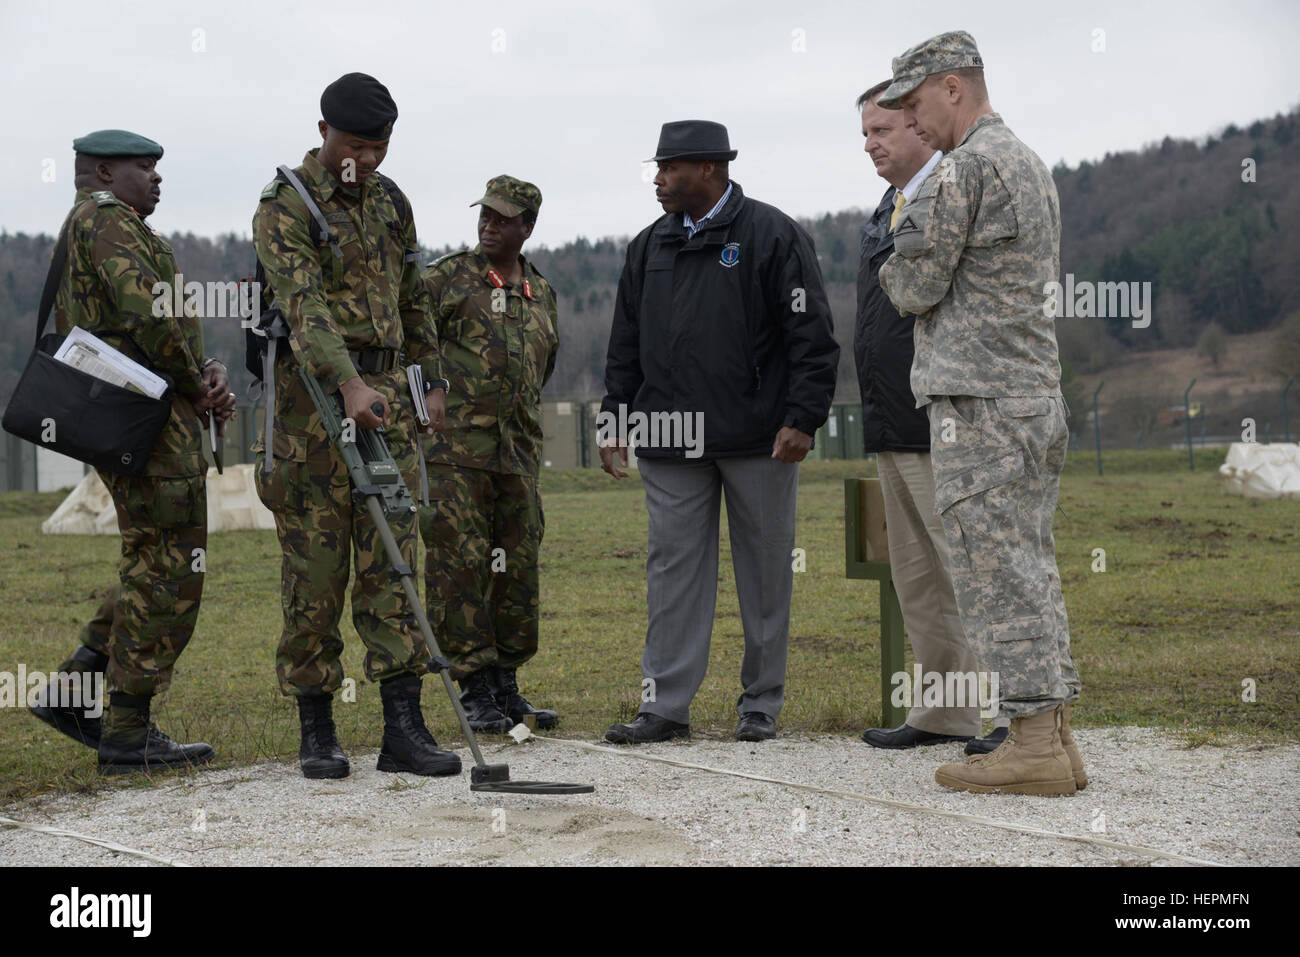 Members of the Botswana Defense Force receive instruction on detecting improvised explosive devices as part of a Counter IED brief during a command-sponsored visit to the Joint Multinational Readiness Center in Hohenfels, Germany, Dec. 3, 2015. The visit allowed leadership from Botswana to observe facilities and capabilities to explore future opportunities for training and partnership. (U.S. Army photo by Spc. Nathanael Mercado/Released) USARAF Botswana JMRC-JMTC visit 151203-A-DN311-097 Stock Photo